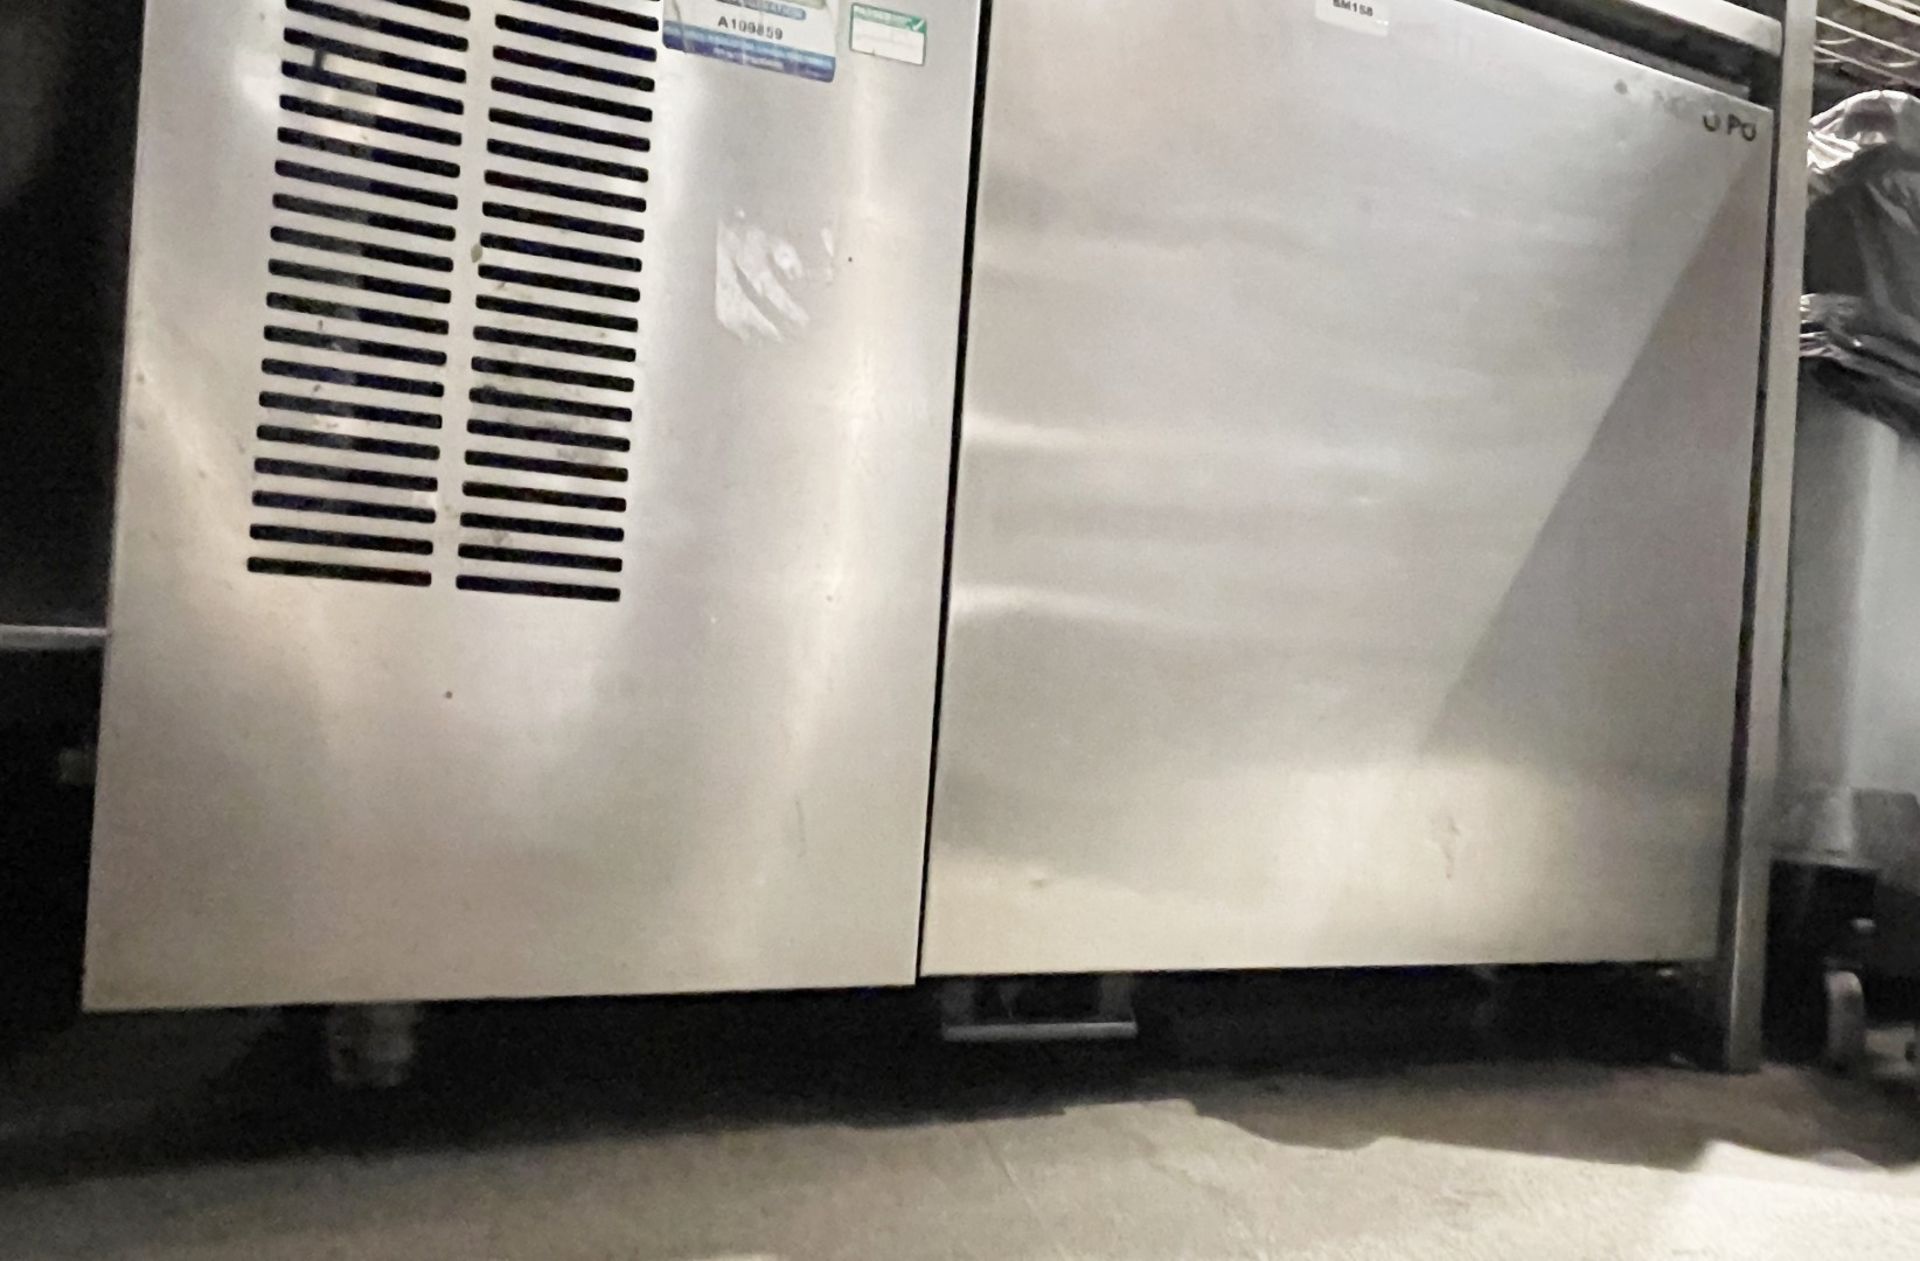 1 x Angelo Po XS51H Under Oven Blast Chiller and Freezer - 10/16KG Cycle - Stainless Steel - Image 3 of 6